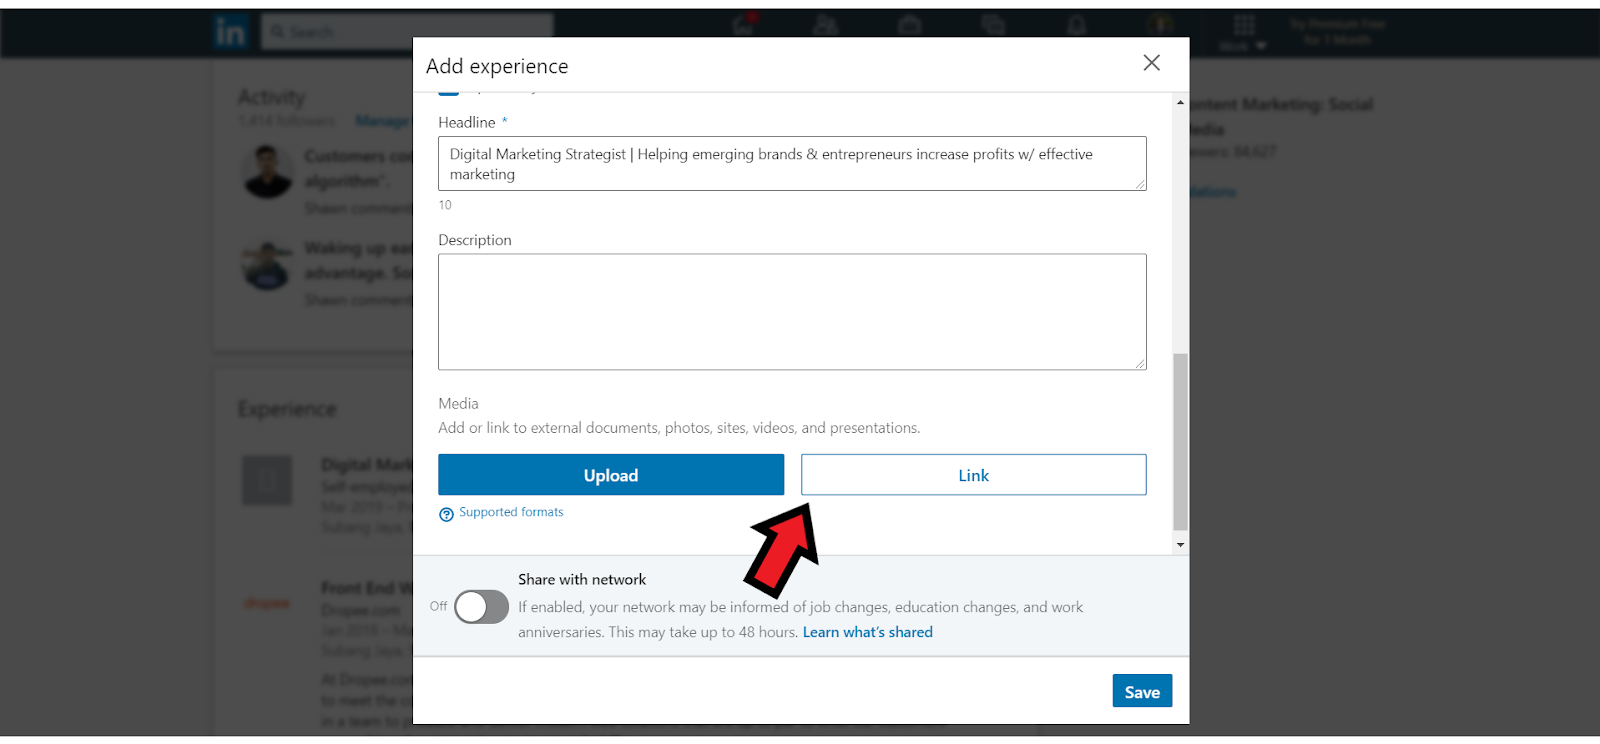 How To Build An Email List: Screenshot of "Experience" section in LinkedIn profile